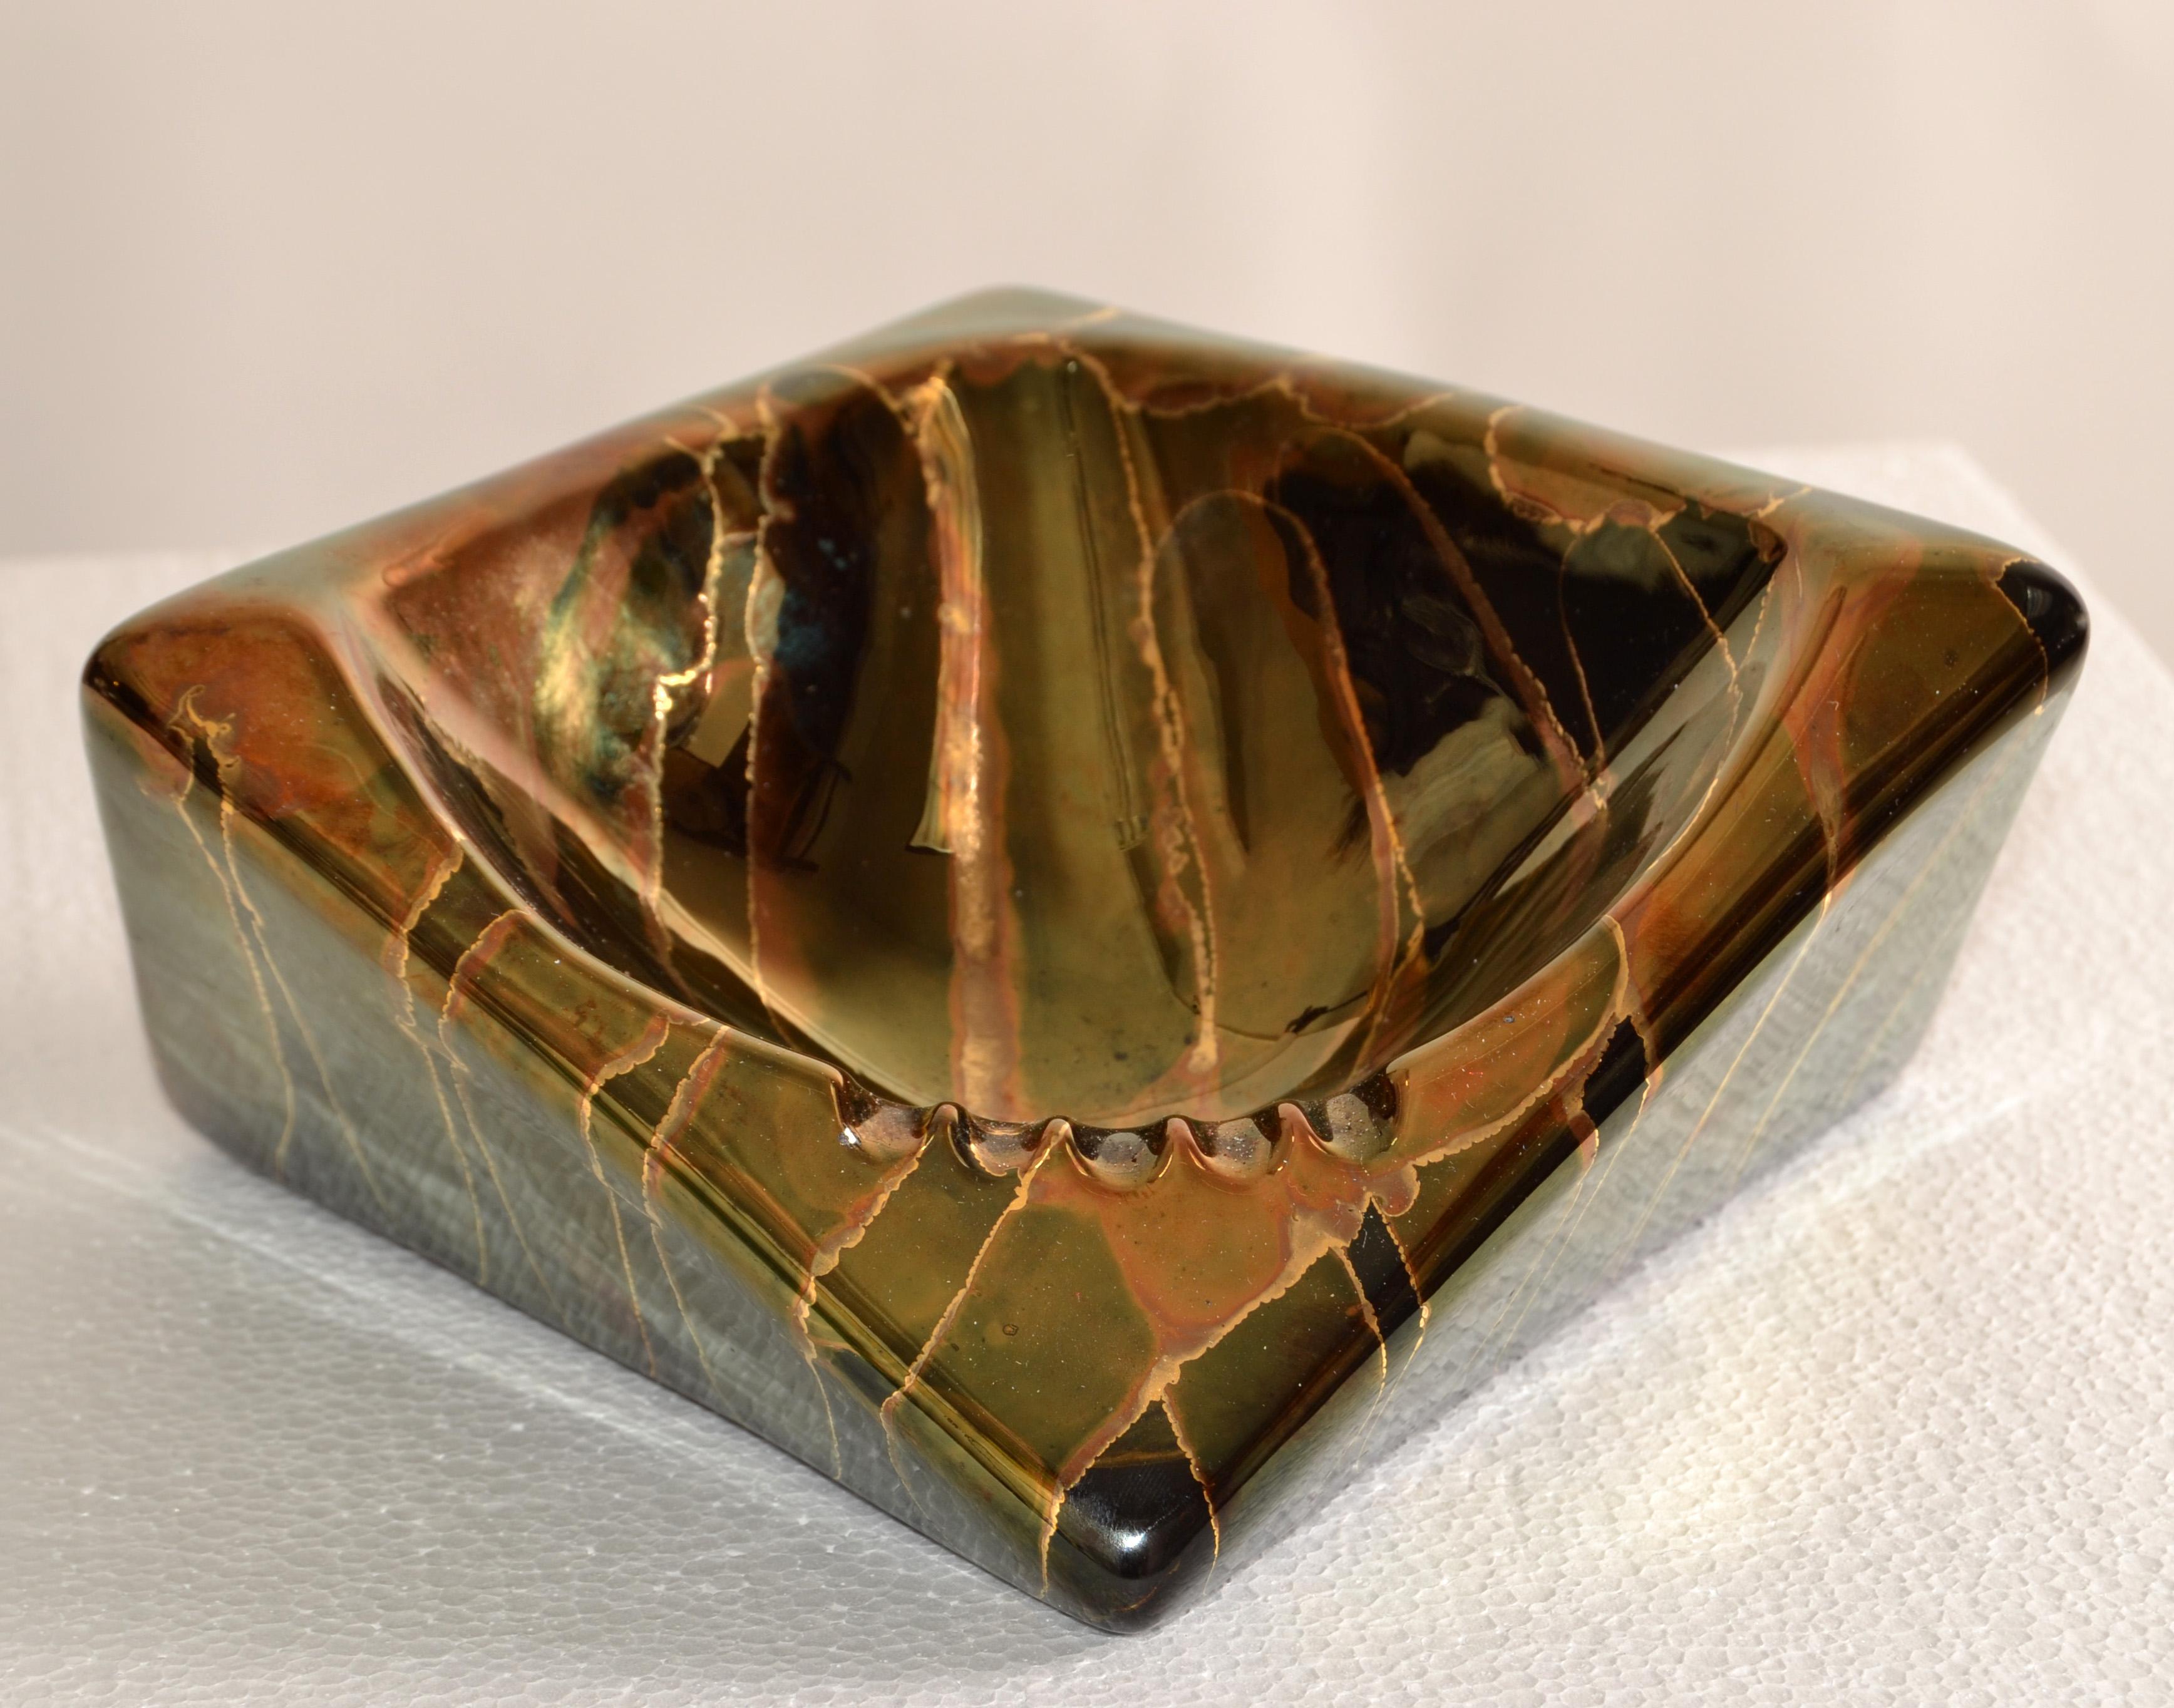 Vintage glazed black, bronze and gold Ceramic ashtray, vide poche, catchall attributed to Raymor Pottery, Italy. 
Handcrafted Pottery Ashtray and a highly decorative asymmetric design.
In good vintage condition, no chips or cracks.
 
 